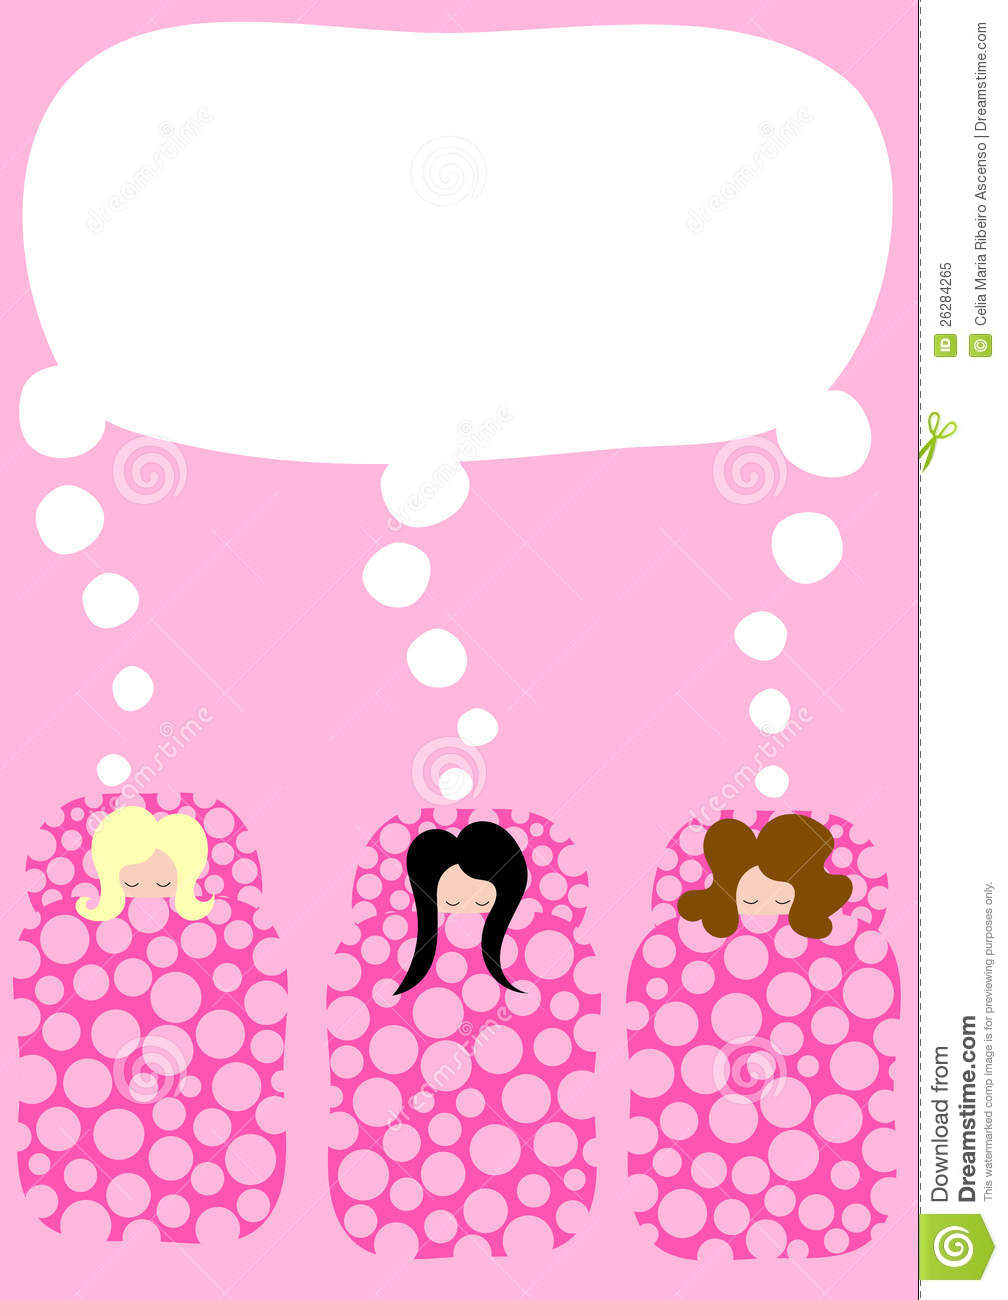 Pyjama Party Invitation Card With Polka Dots Sleeping Bags And Dream